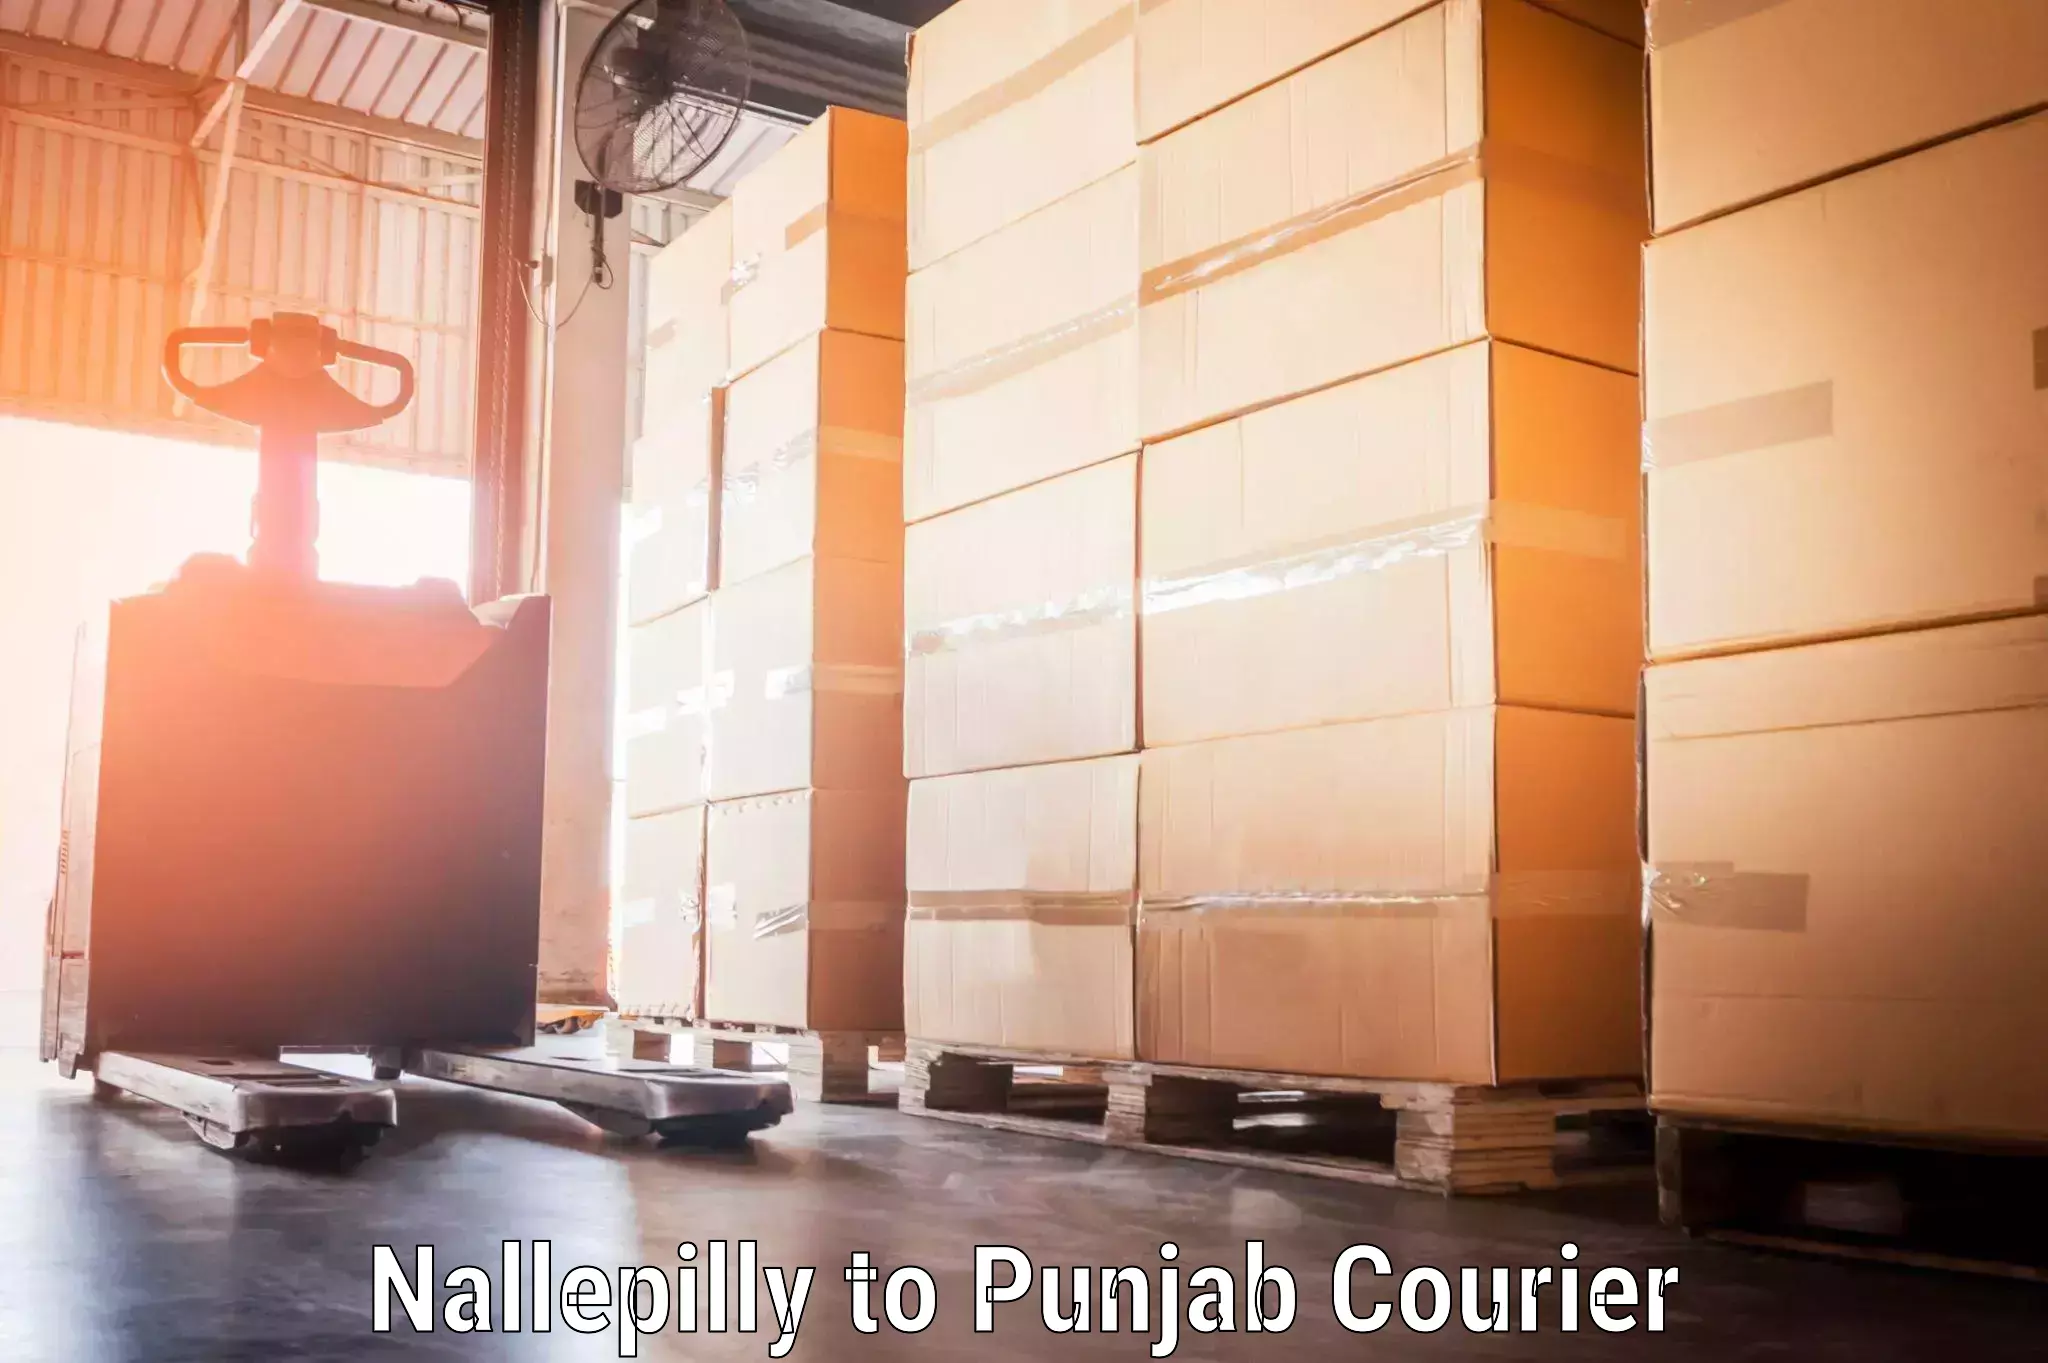 Baggage transport professionals Nallepilly to Punjab